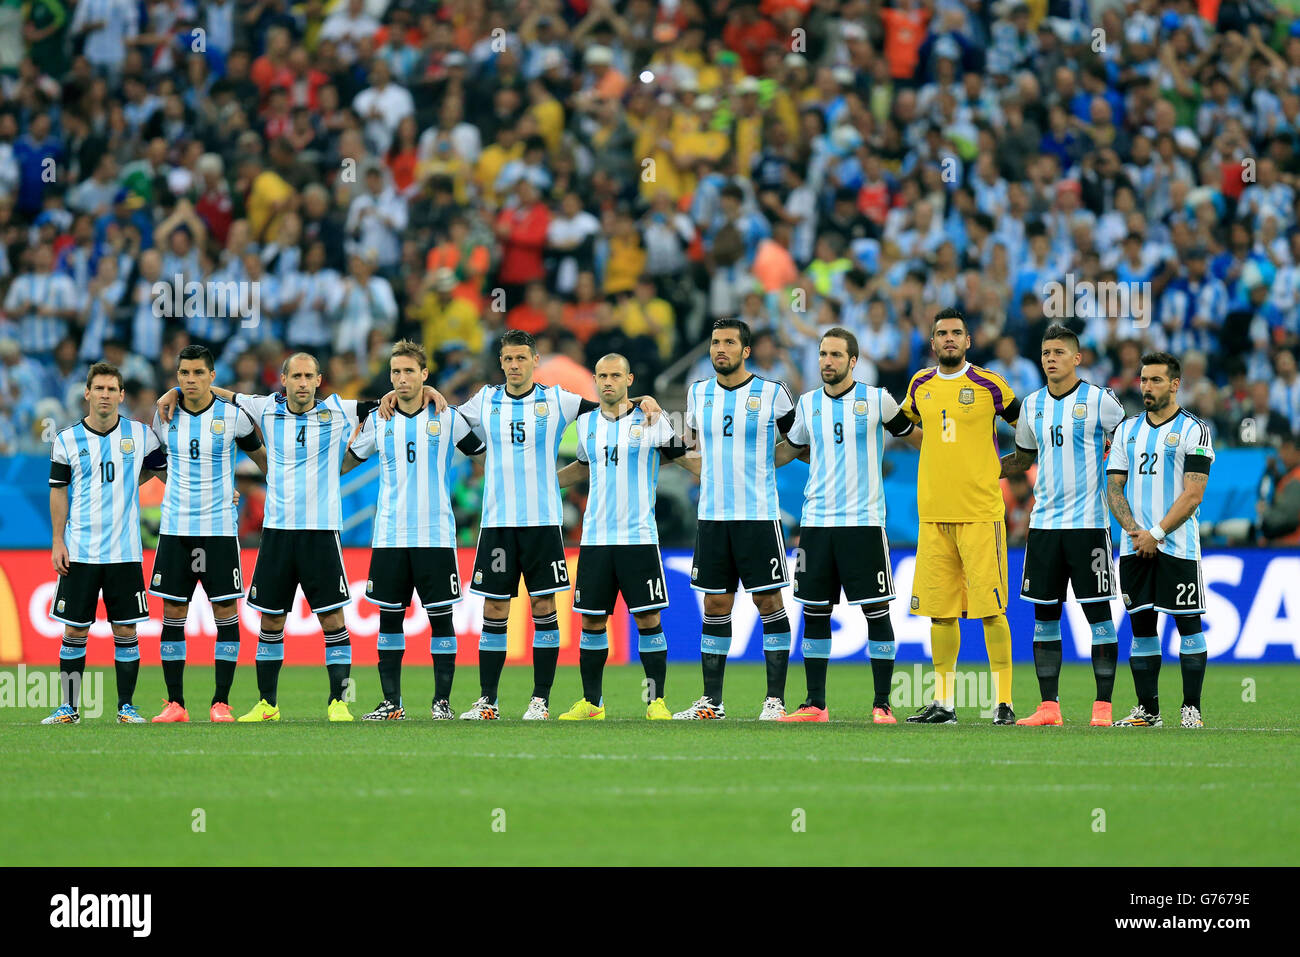 The Argentina team pay their respects for the passing of former international Alfredo di Stefano before the FIFA World Cup Semi Final at the Arena de Sao Paulo, Sao Paulo, Brazil. Stock Photo